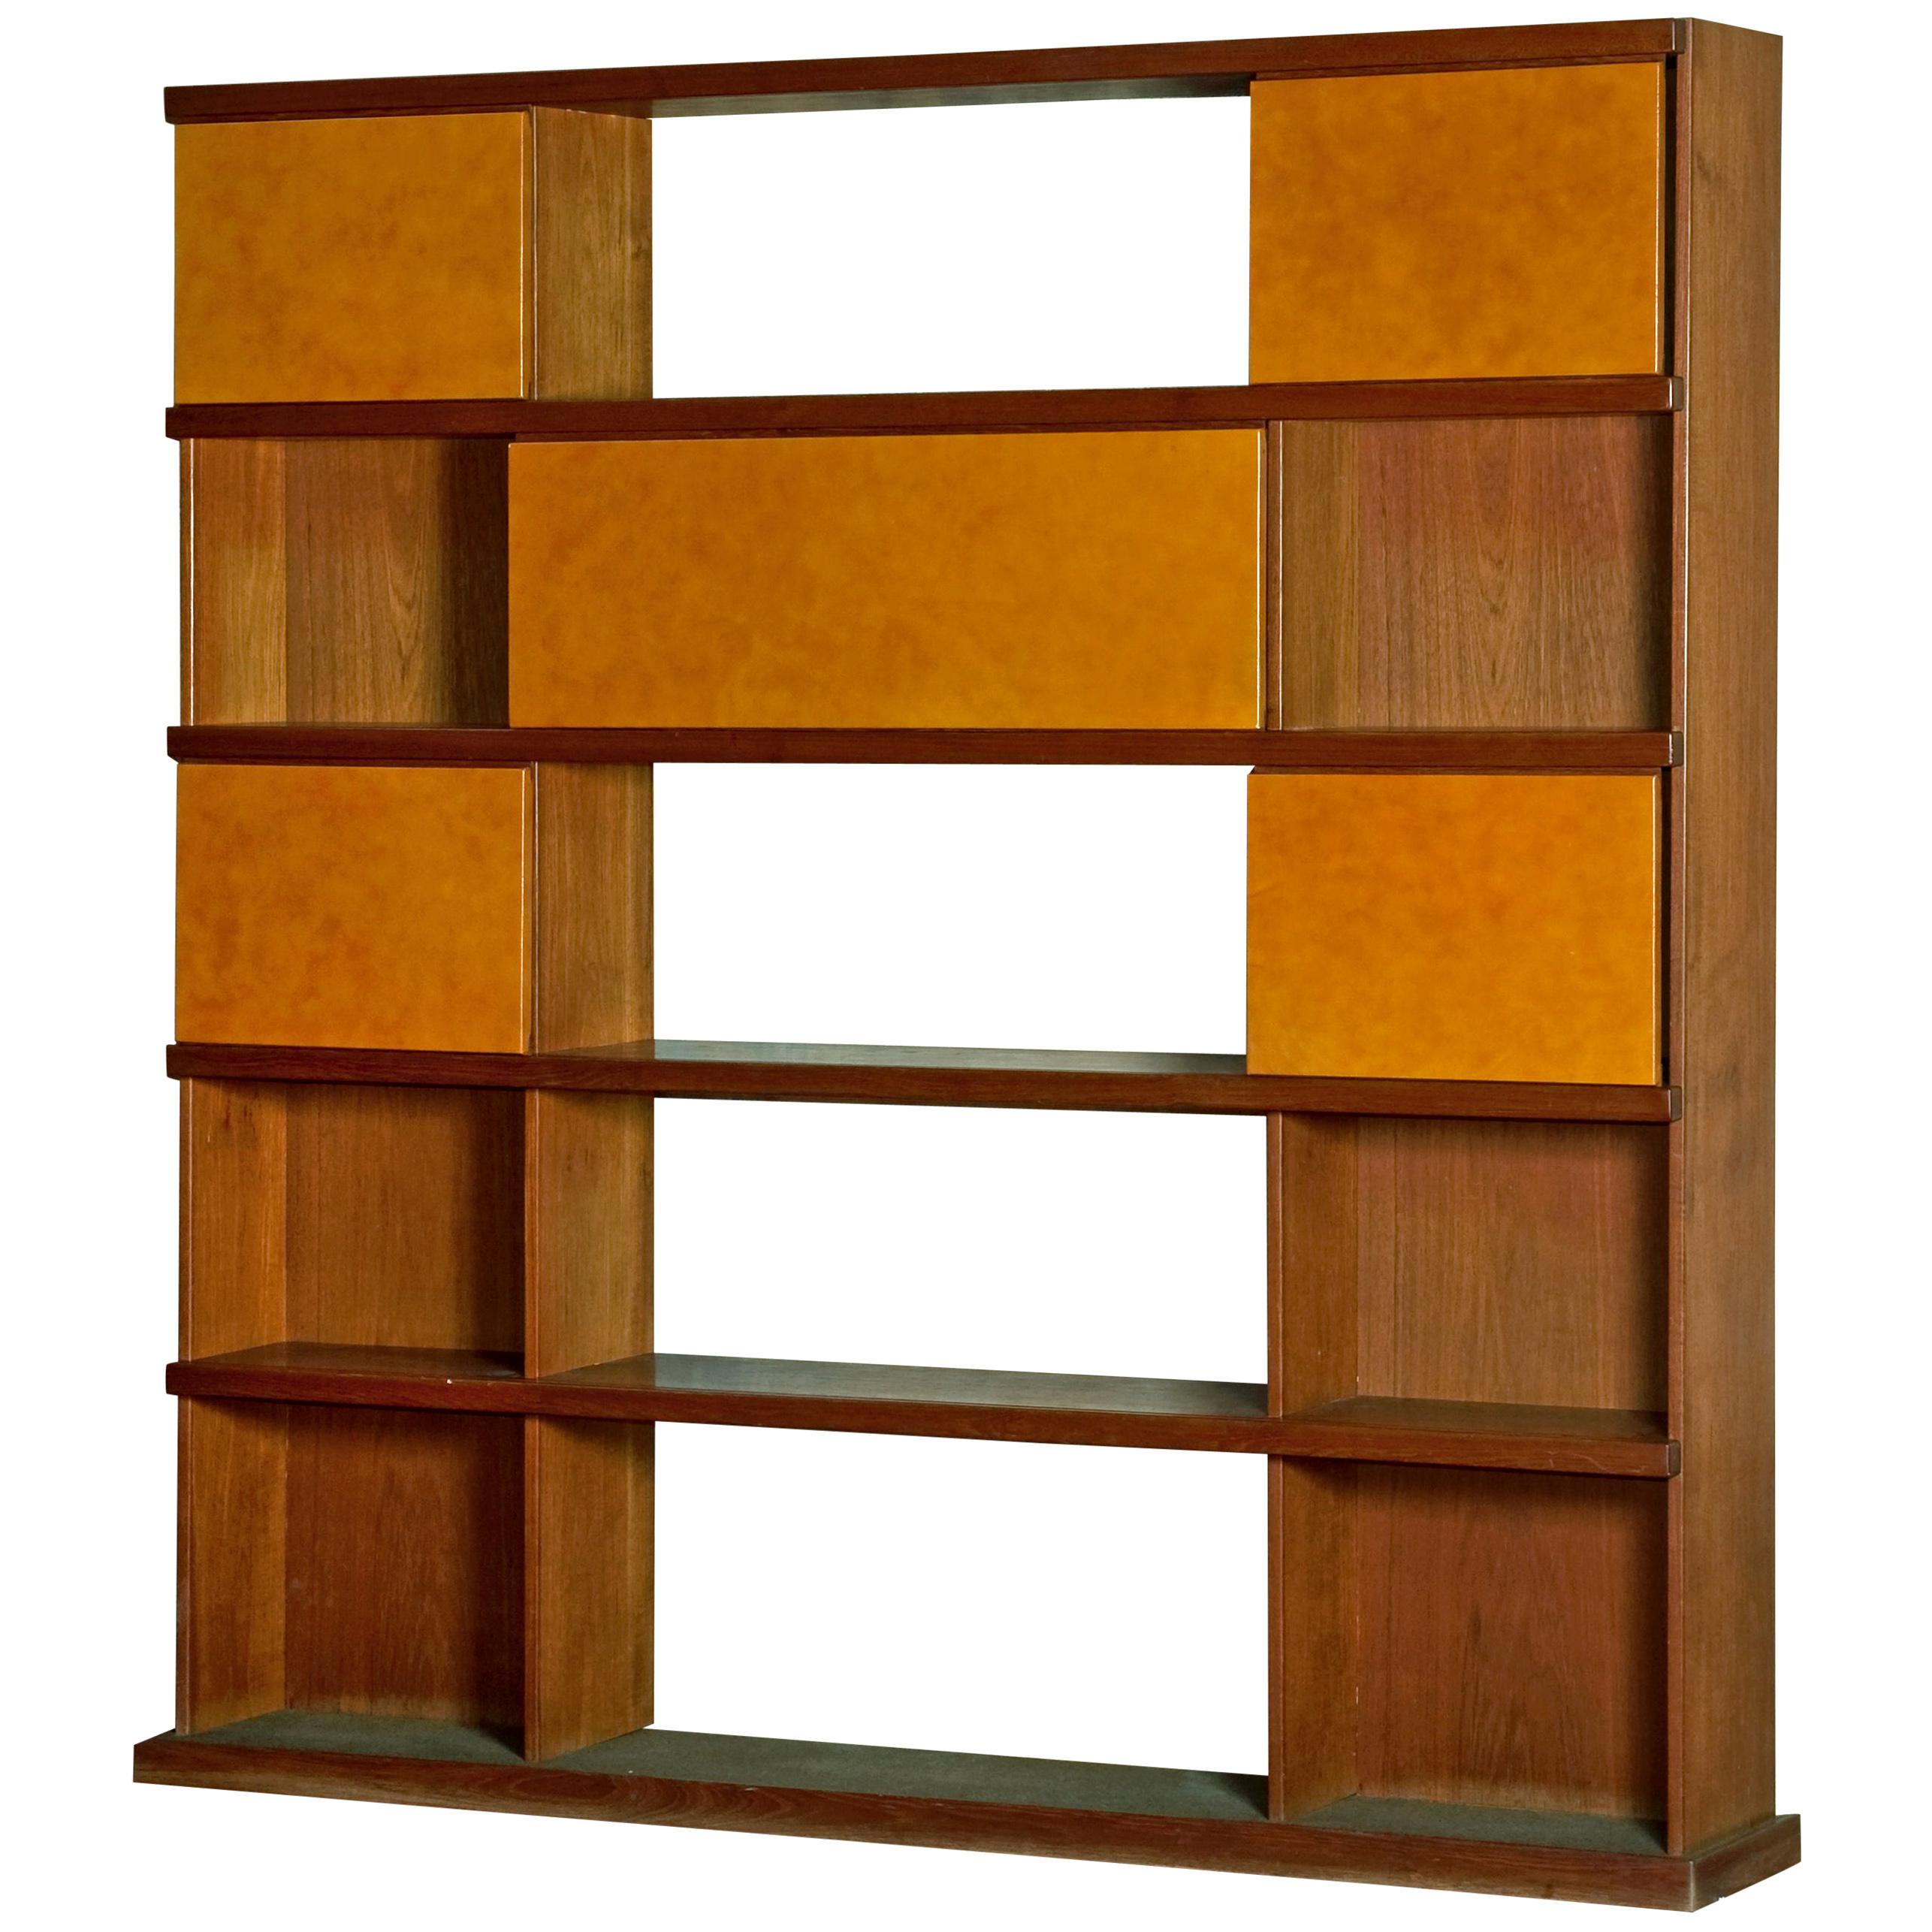 Italian Midcentury Wood and Leather Bookcase